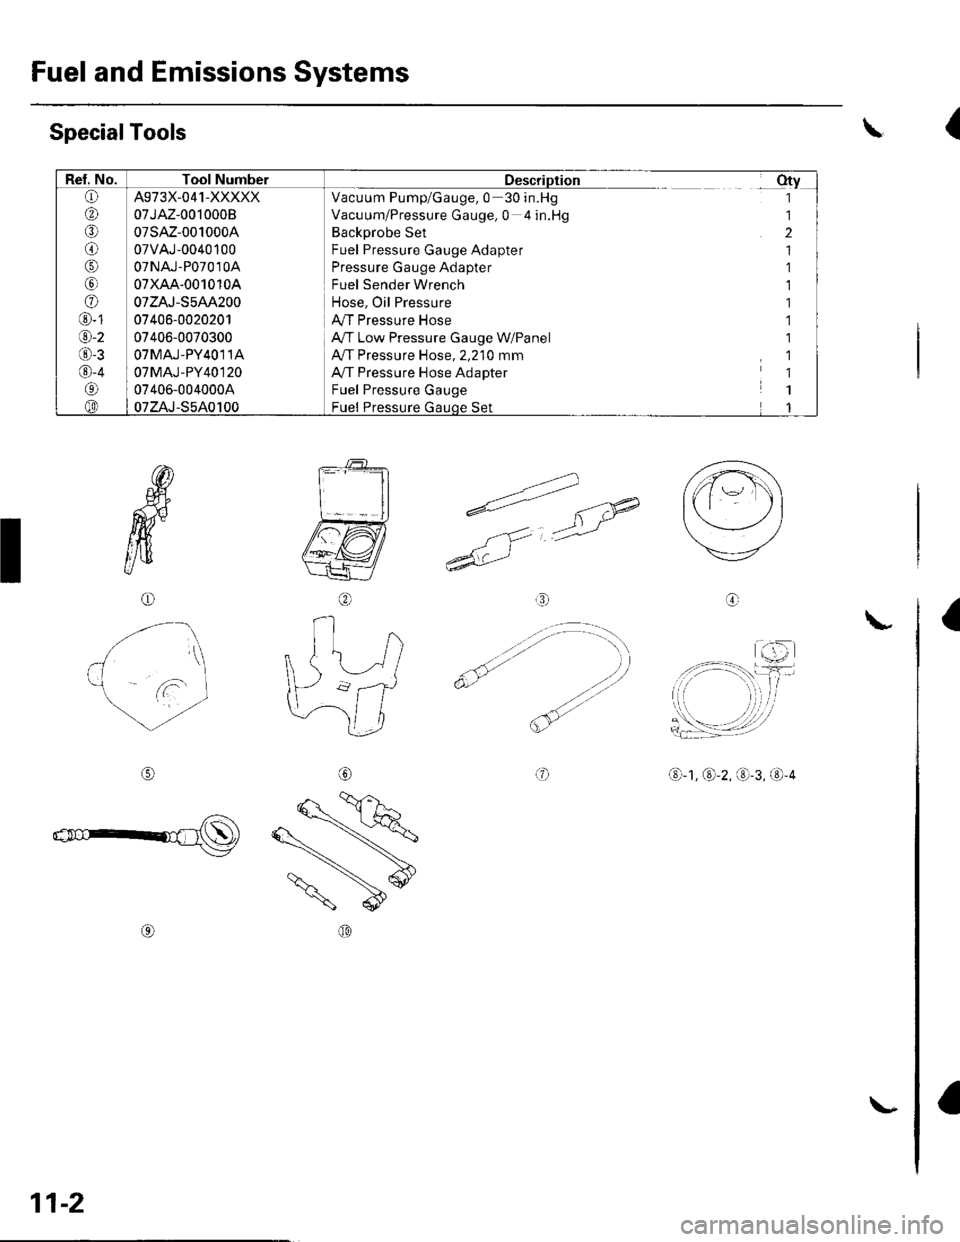 HONDA CIVIC 2002 7.G Workshop Manual Fuel and Emissions Systems
Rel. No.Tool NumberDescriptionotv(L)
@
o
@
@
@
o
@-t
@-2
O-3
@-4
@(iD
A973X-041-XXXXX
07JAZ-0010008
07sAz-001000A
07vAJ-0040100
07NAJ-P07010A
07xAA-001010A
07zAJ-S5AA200
074